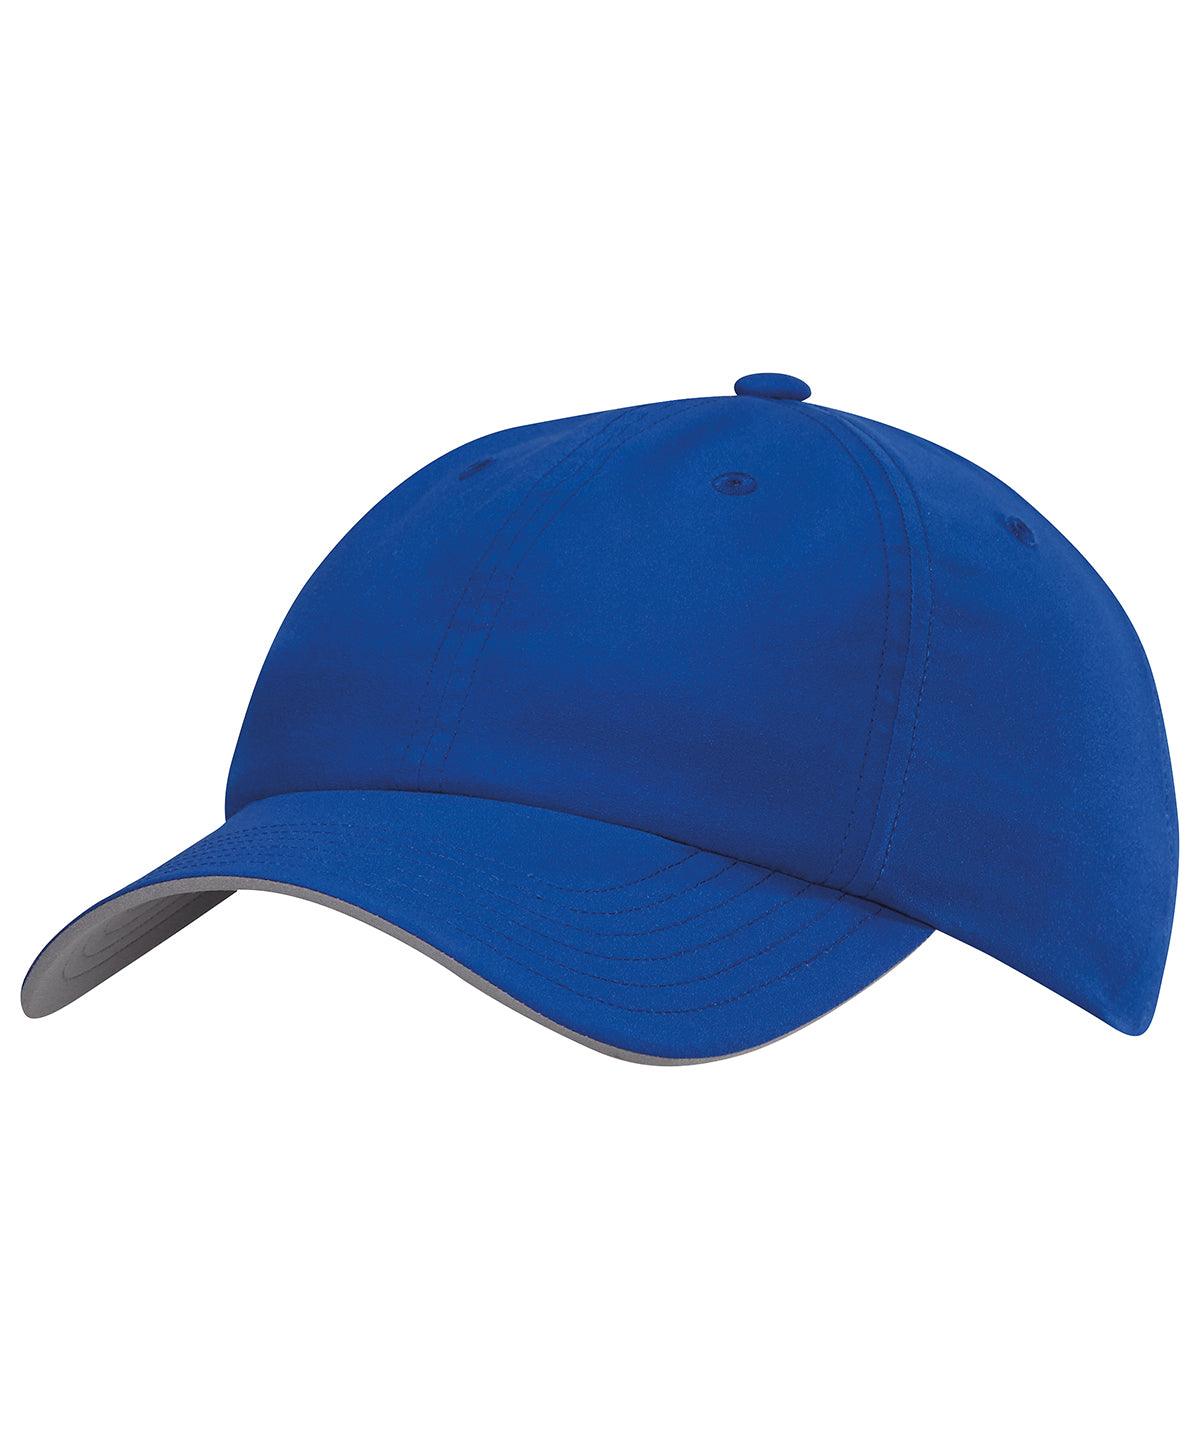 Bold Blue - Performance cap Caps adidas® Exclusives, Golf, Headwear, Premium Sports, Sports & Leisure, UPF Protection Schoolwear Centres